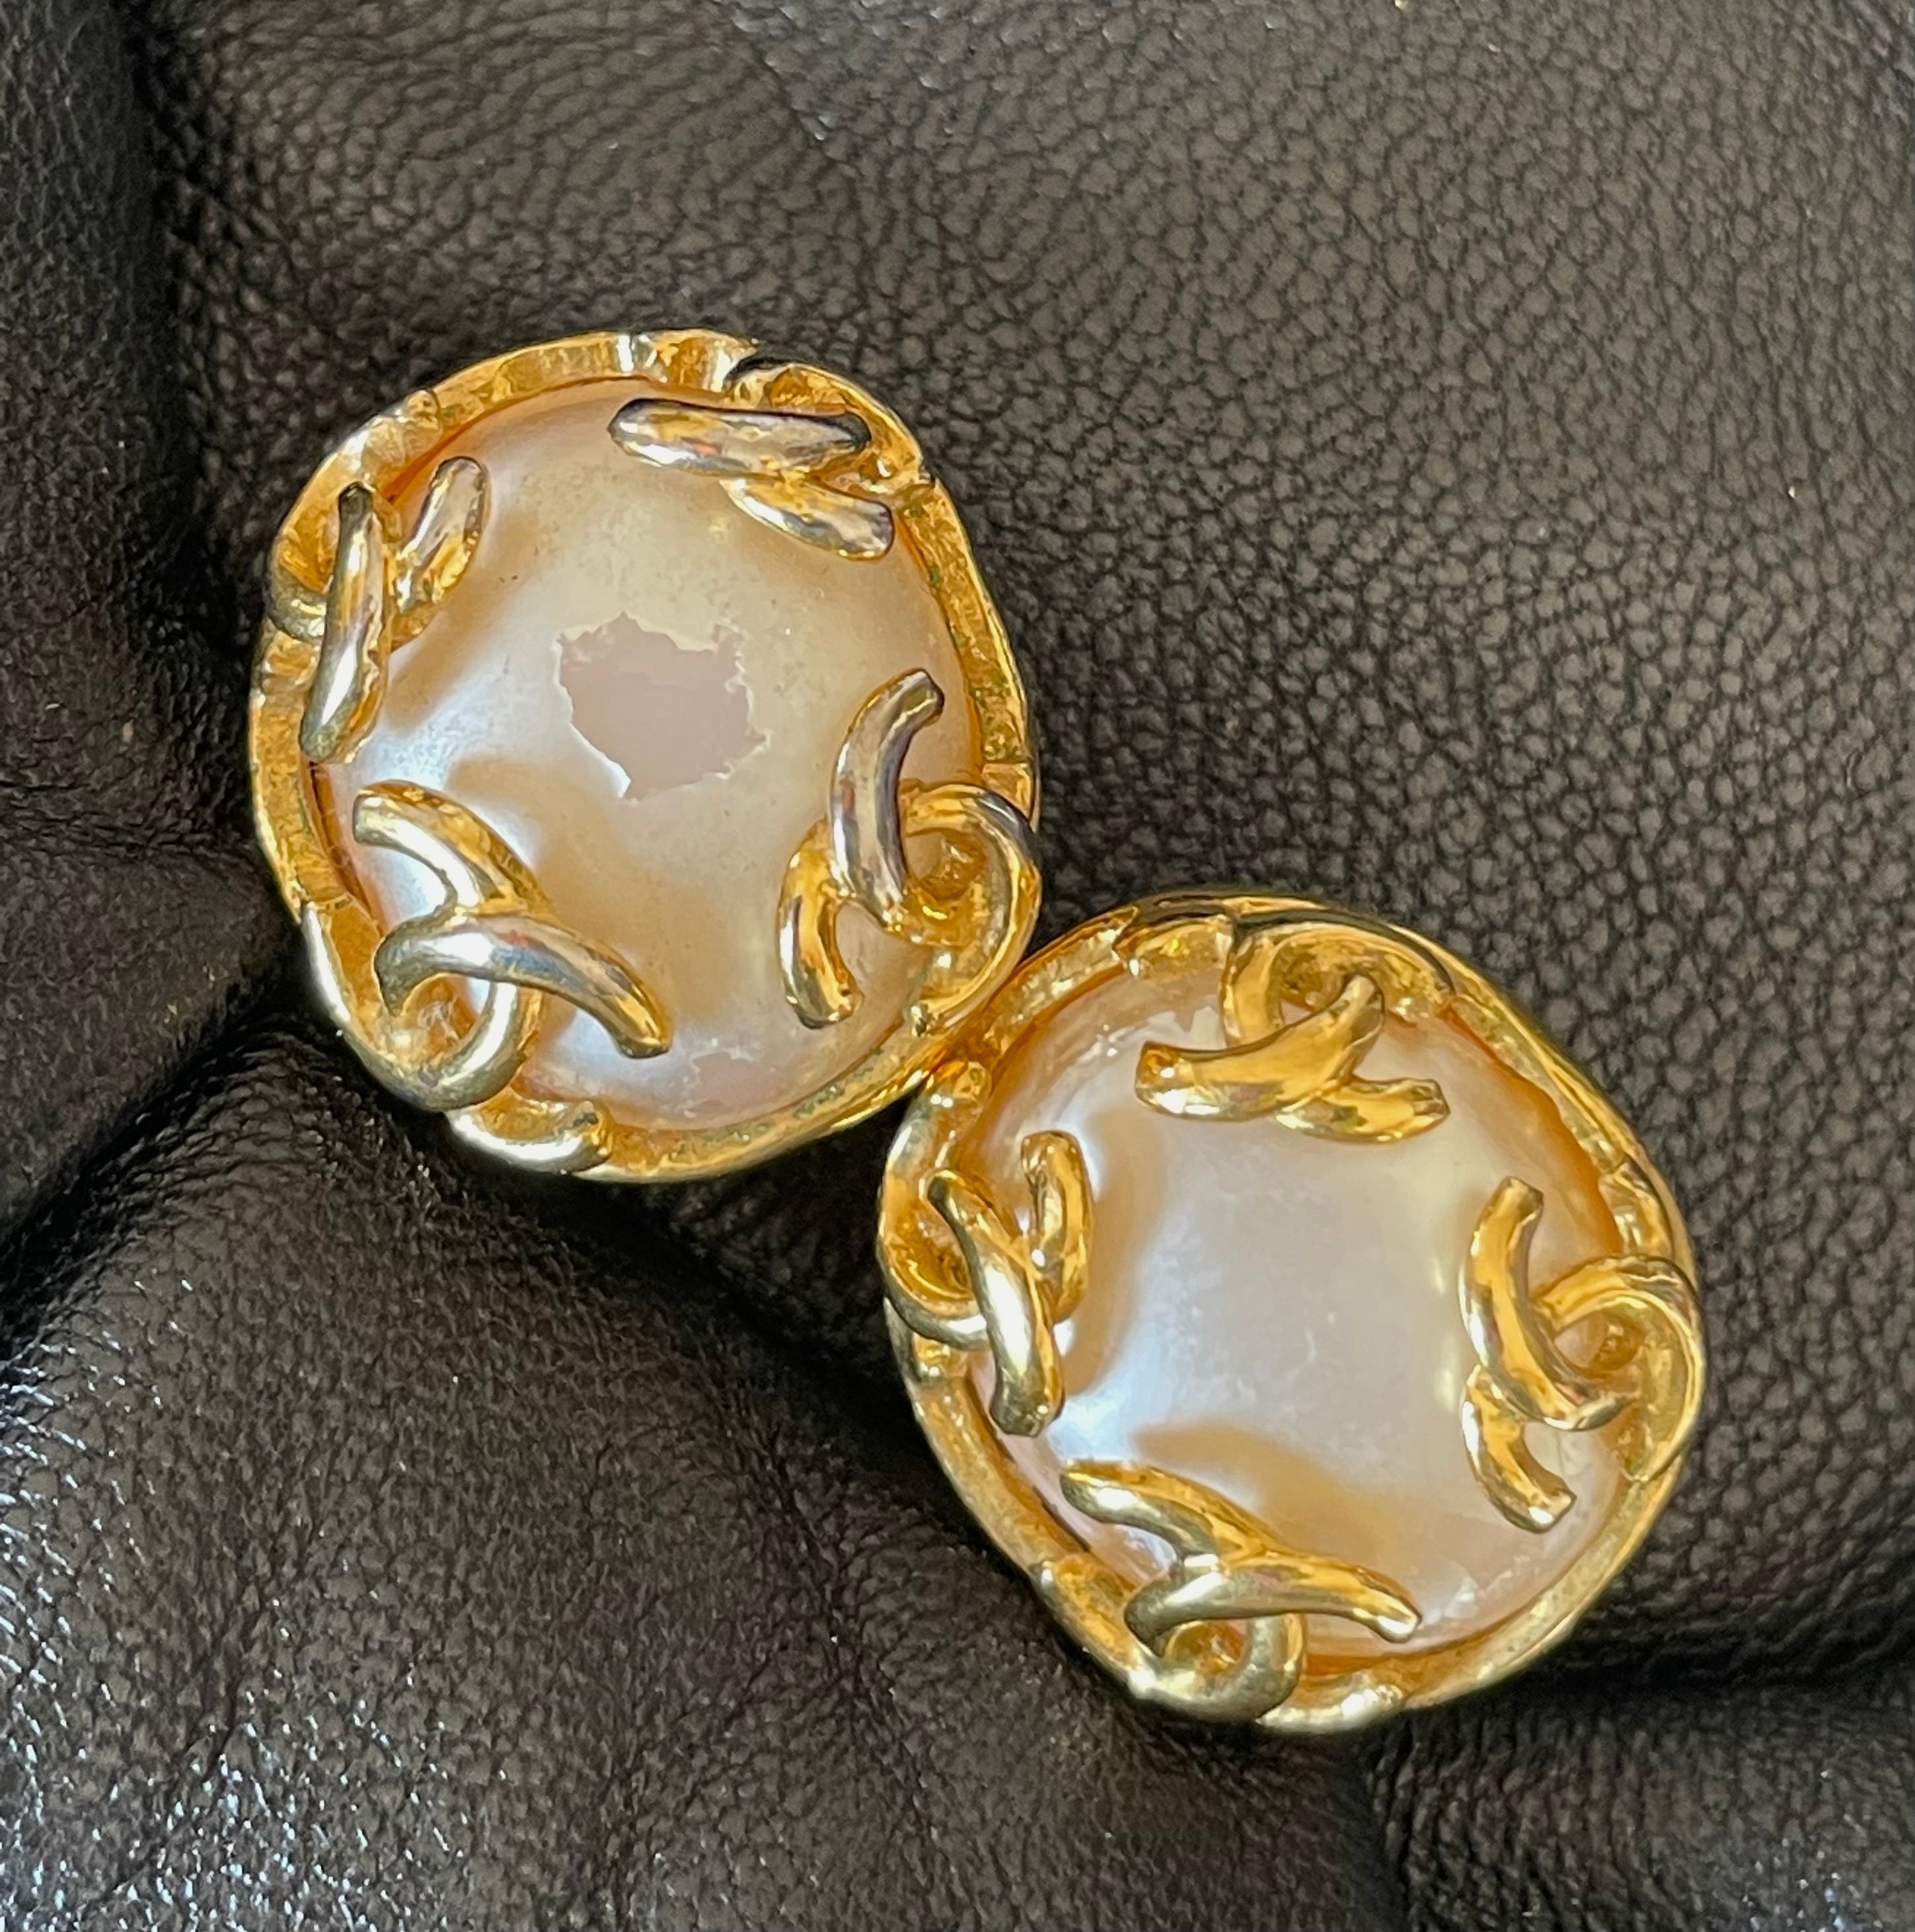 Vintage CHANEL Golden CC and Oval Pearl Earrings. Classic 